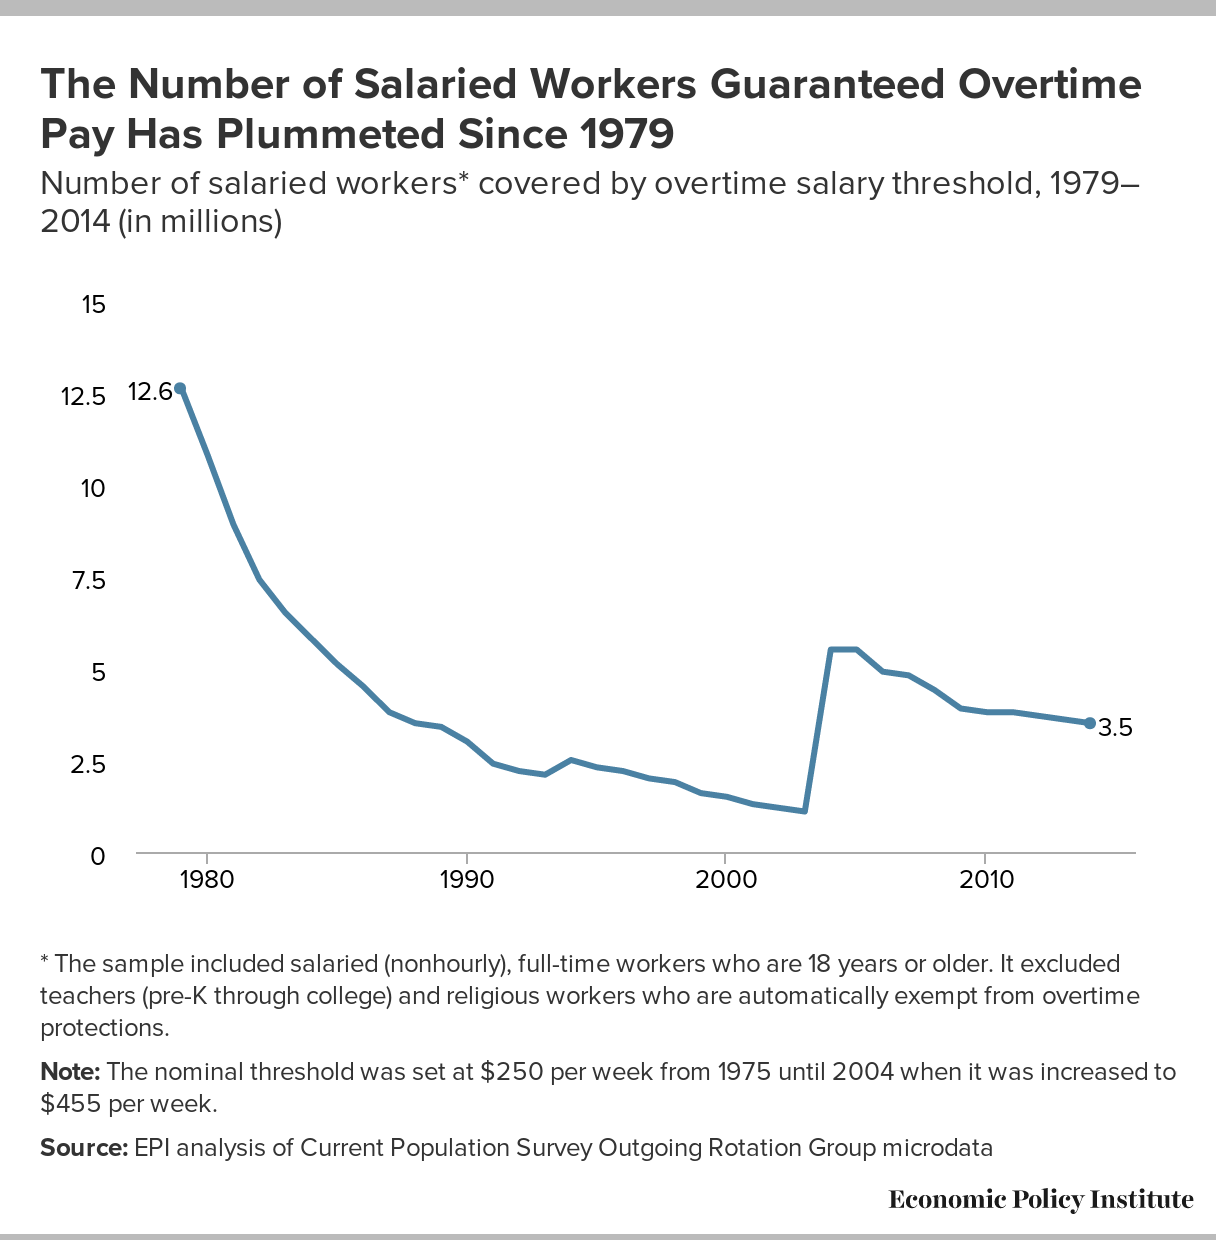 Raising the overtime salary threshold is an important improvement in